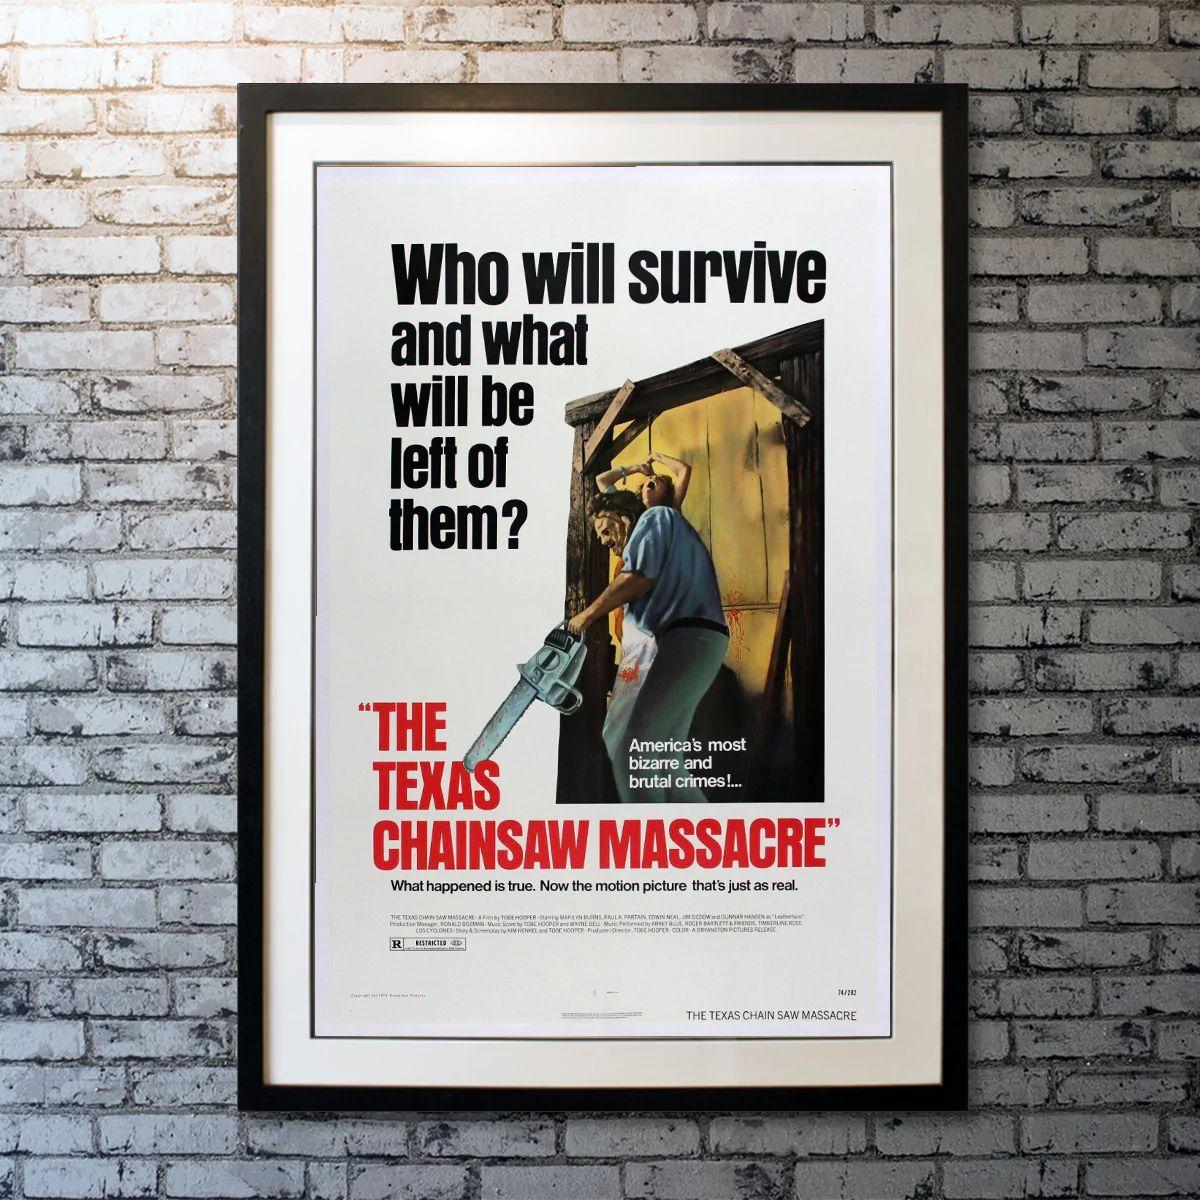 The Texas Chainsaw Massacre, unframed poster, 1974

Original One Sheet (27 X 41 Inches). Five friends head out to rural Texas to visit the grave of a grandfather. On the way they stumble across what appears to be a deserted house, only to discover